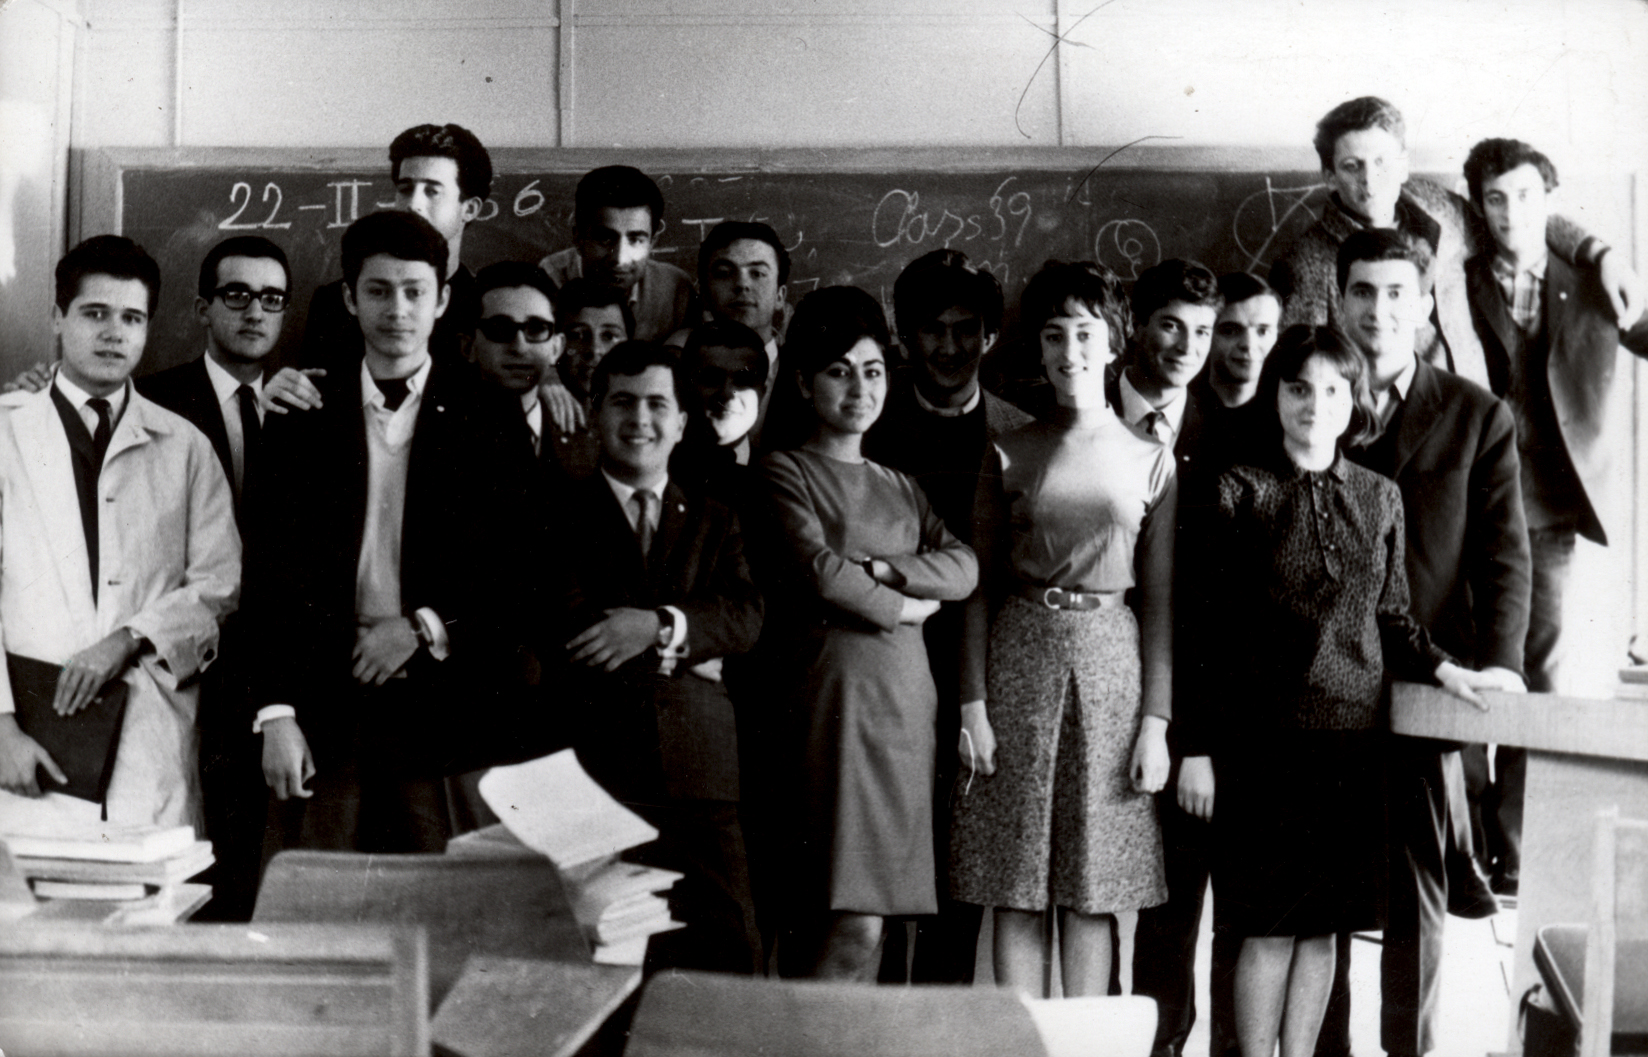 Students having their photos taken in front of the blackboard (1966)